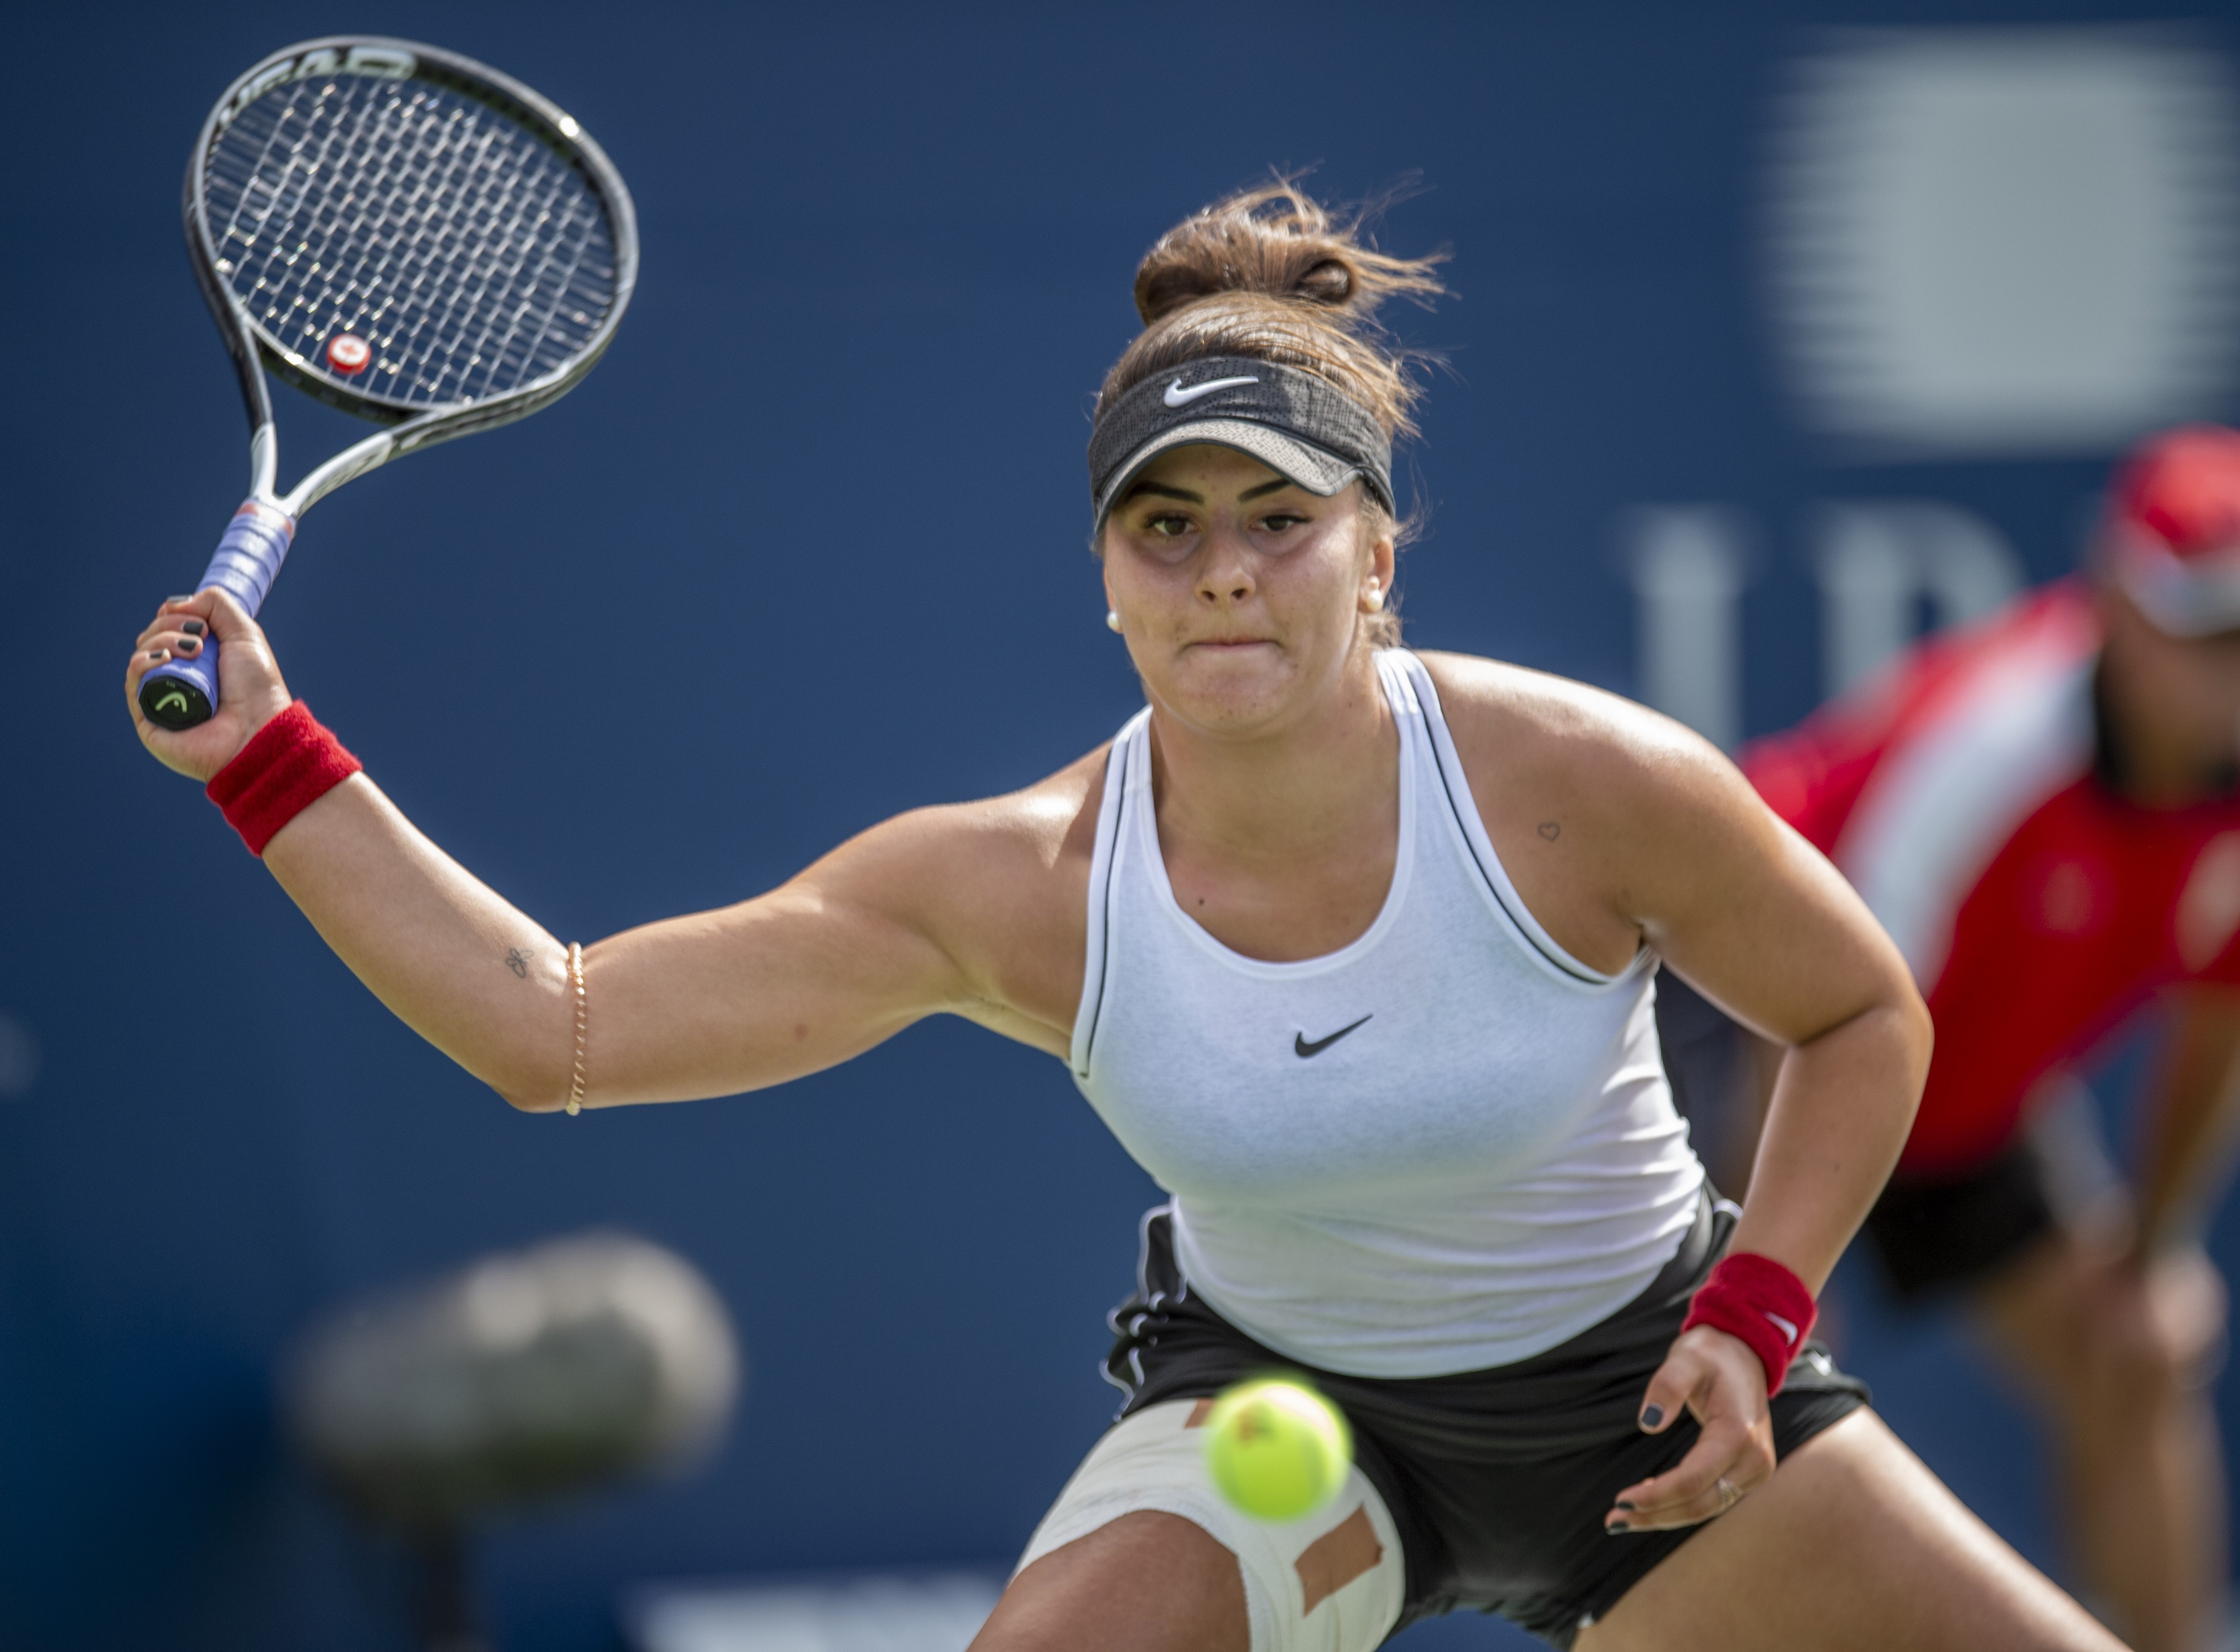 Mississauga's Bianca Andreescu will face Serena Williams in Rogers Cup final4380 x 3230